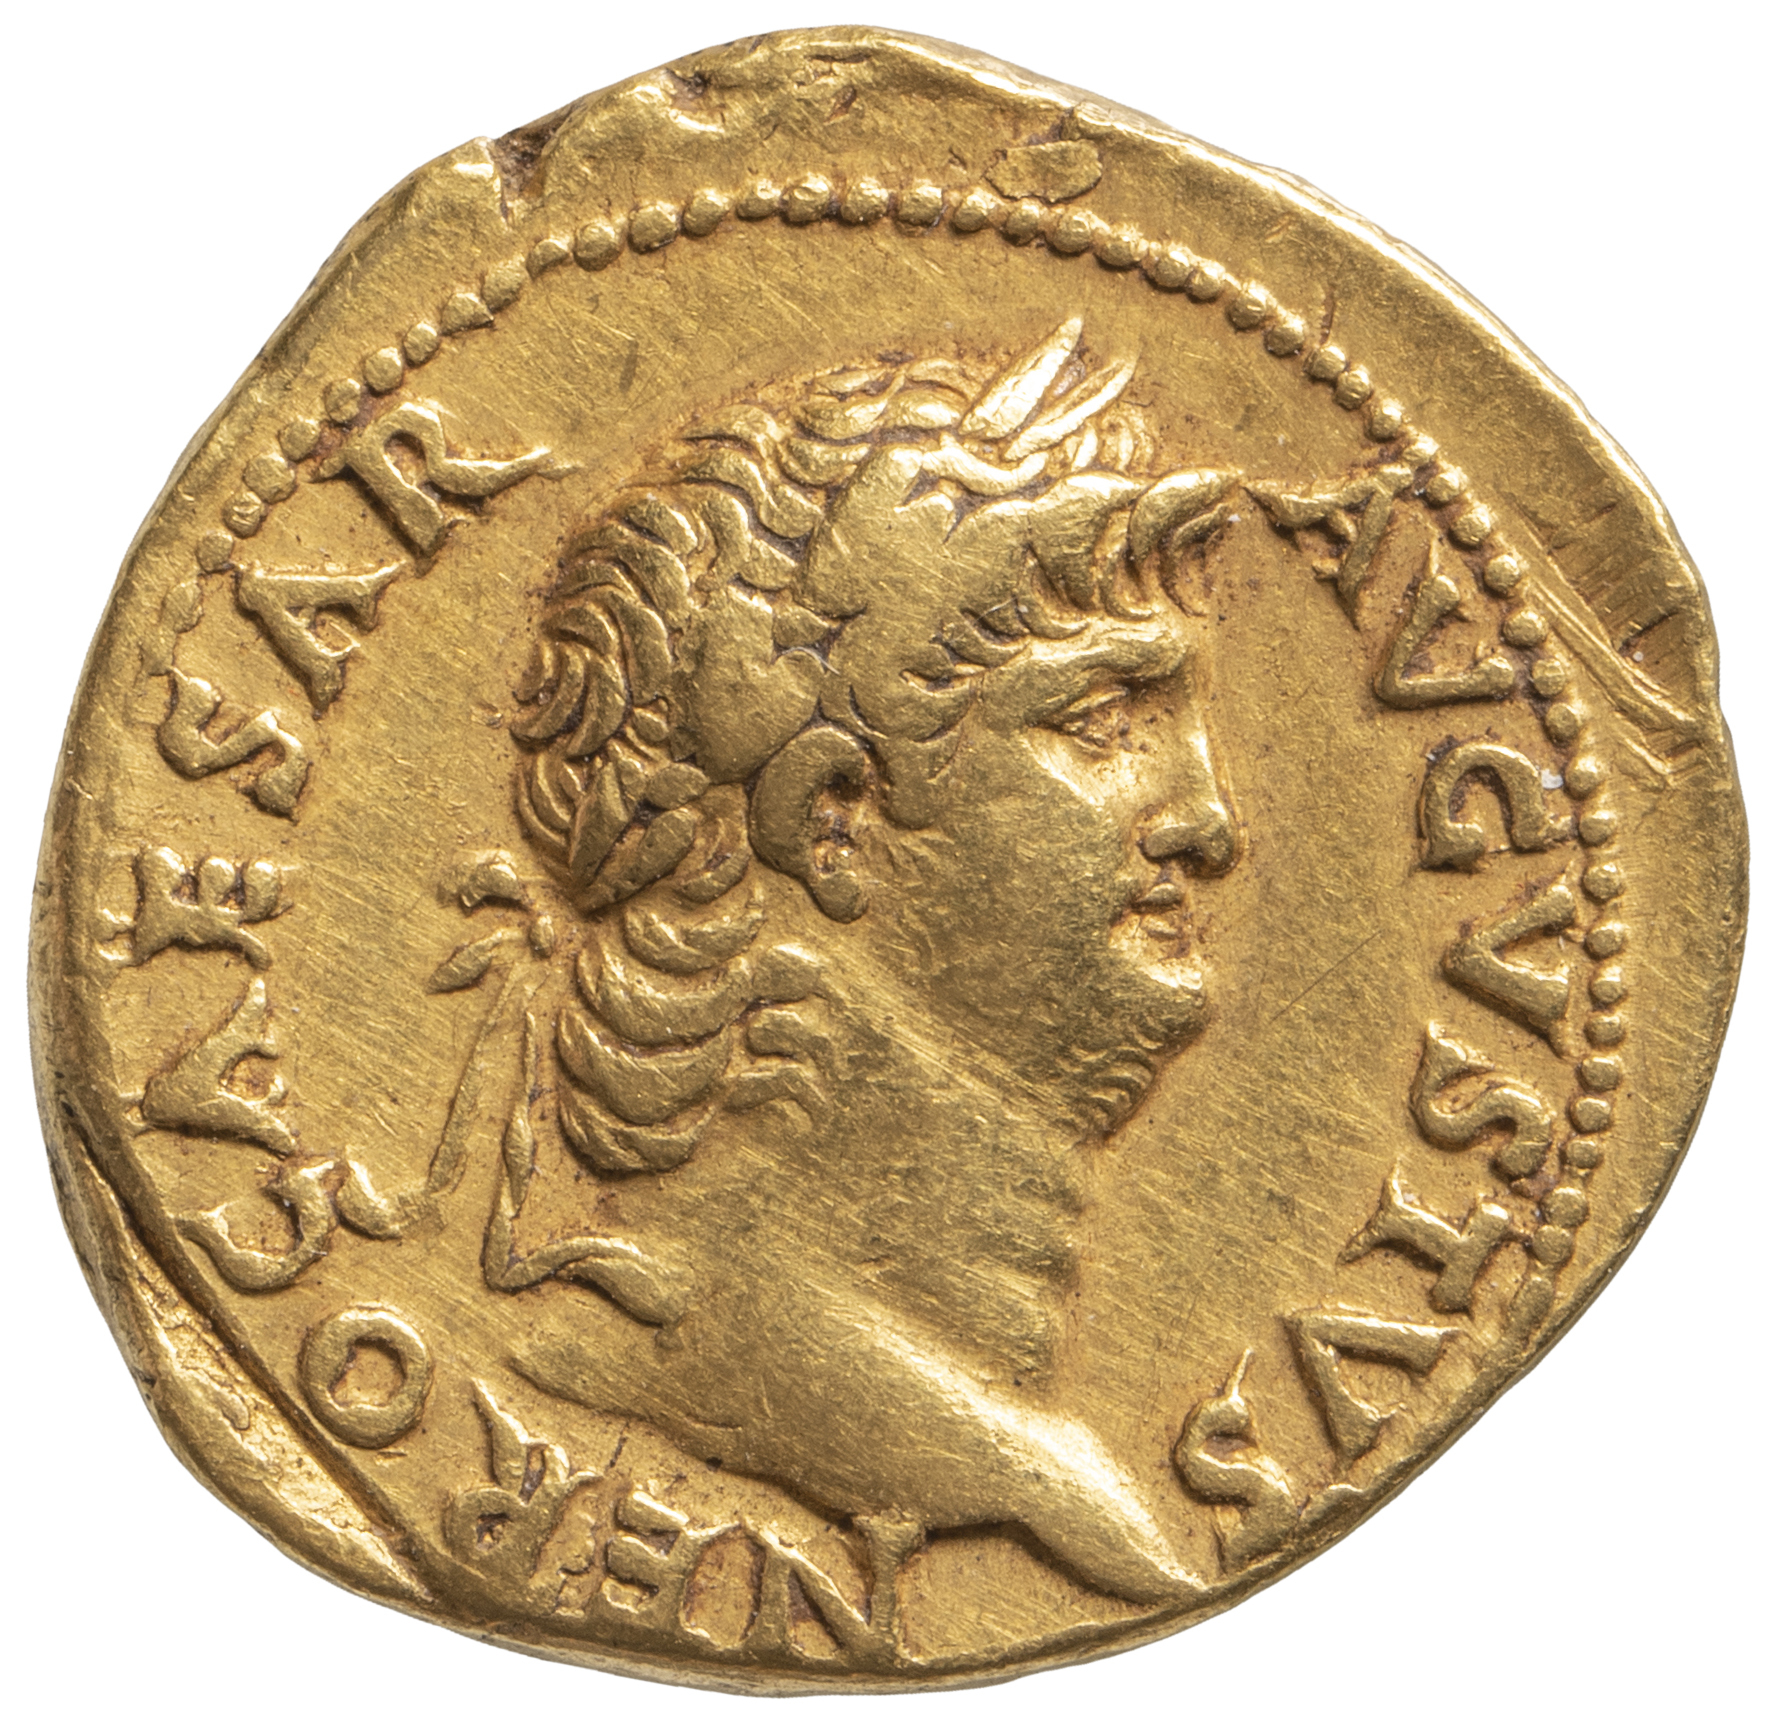 Gold coin of Nero wearing a laurel wreath